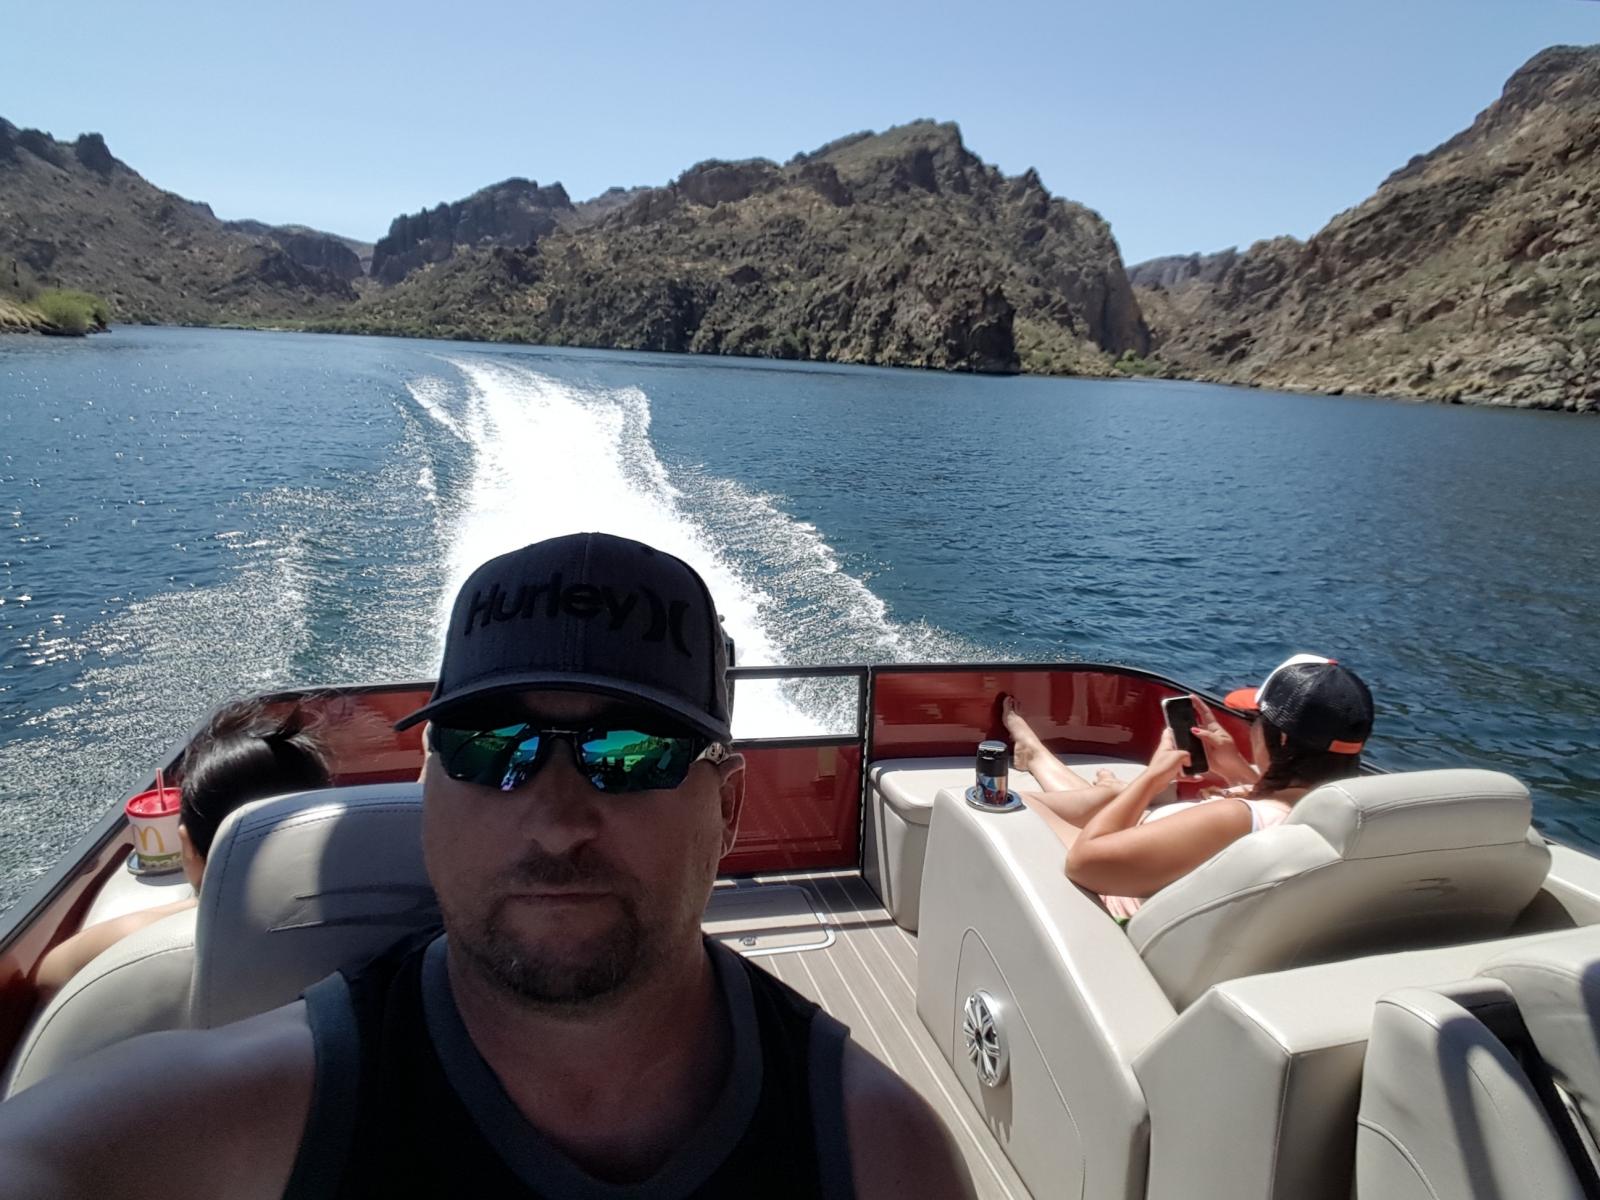 I drive the boat and the wife enjoys the view!